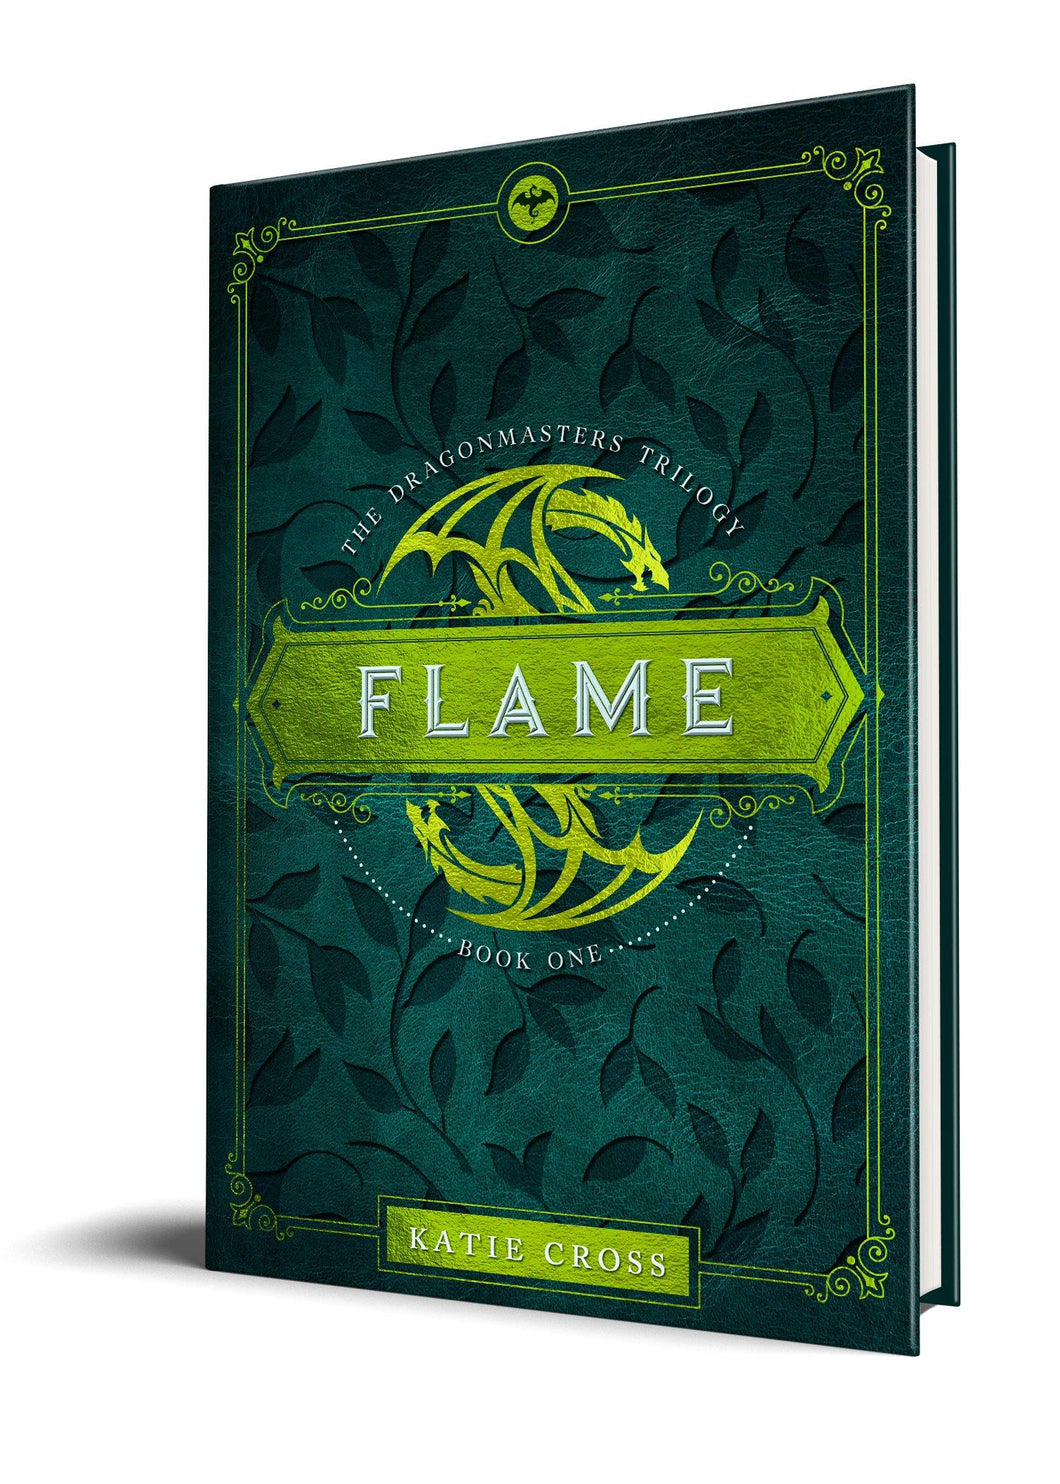 FLAME (Paperback Edition) - Katie Cross